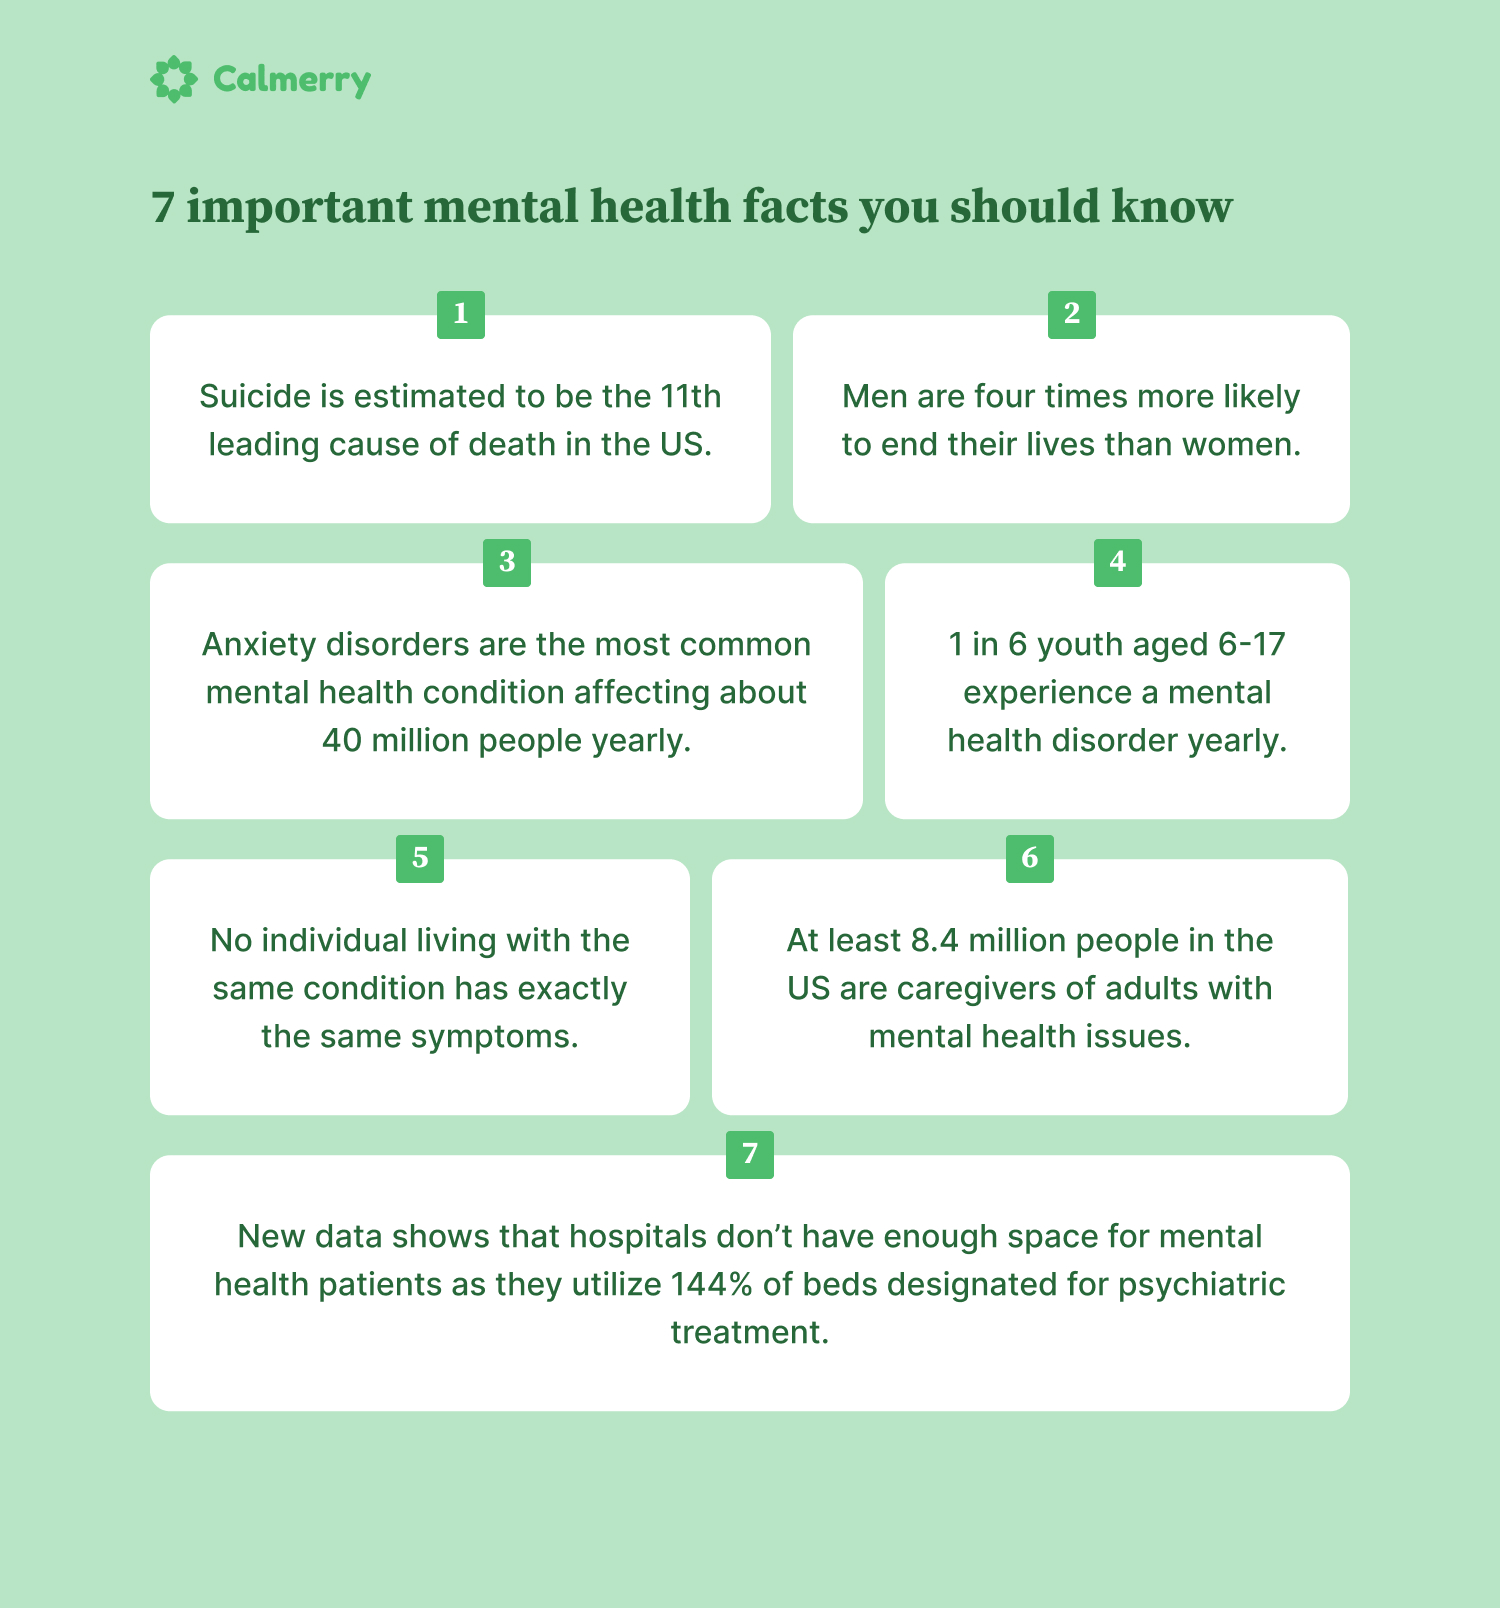 7 important mental health facts you should know